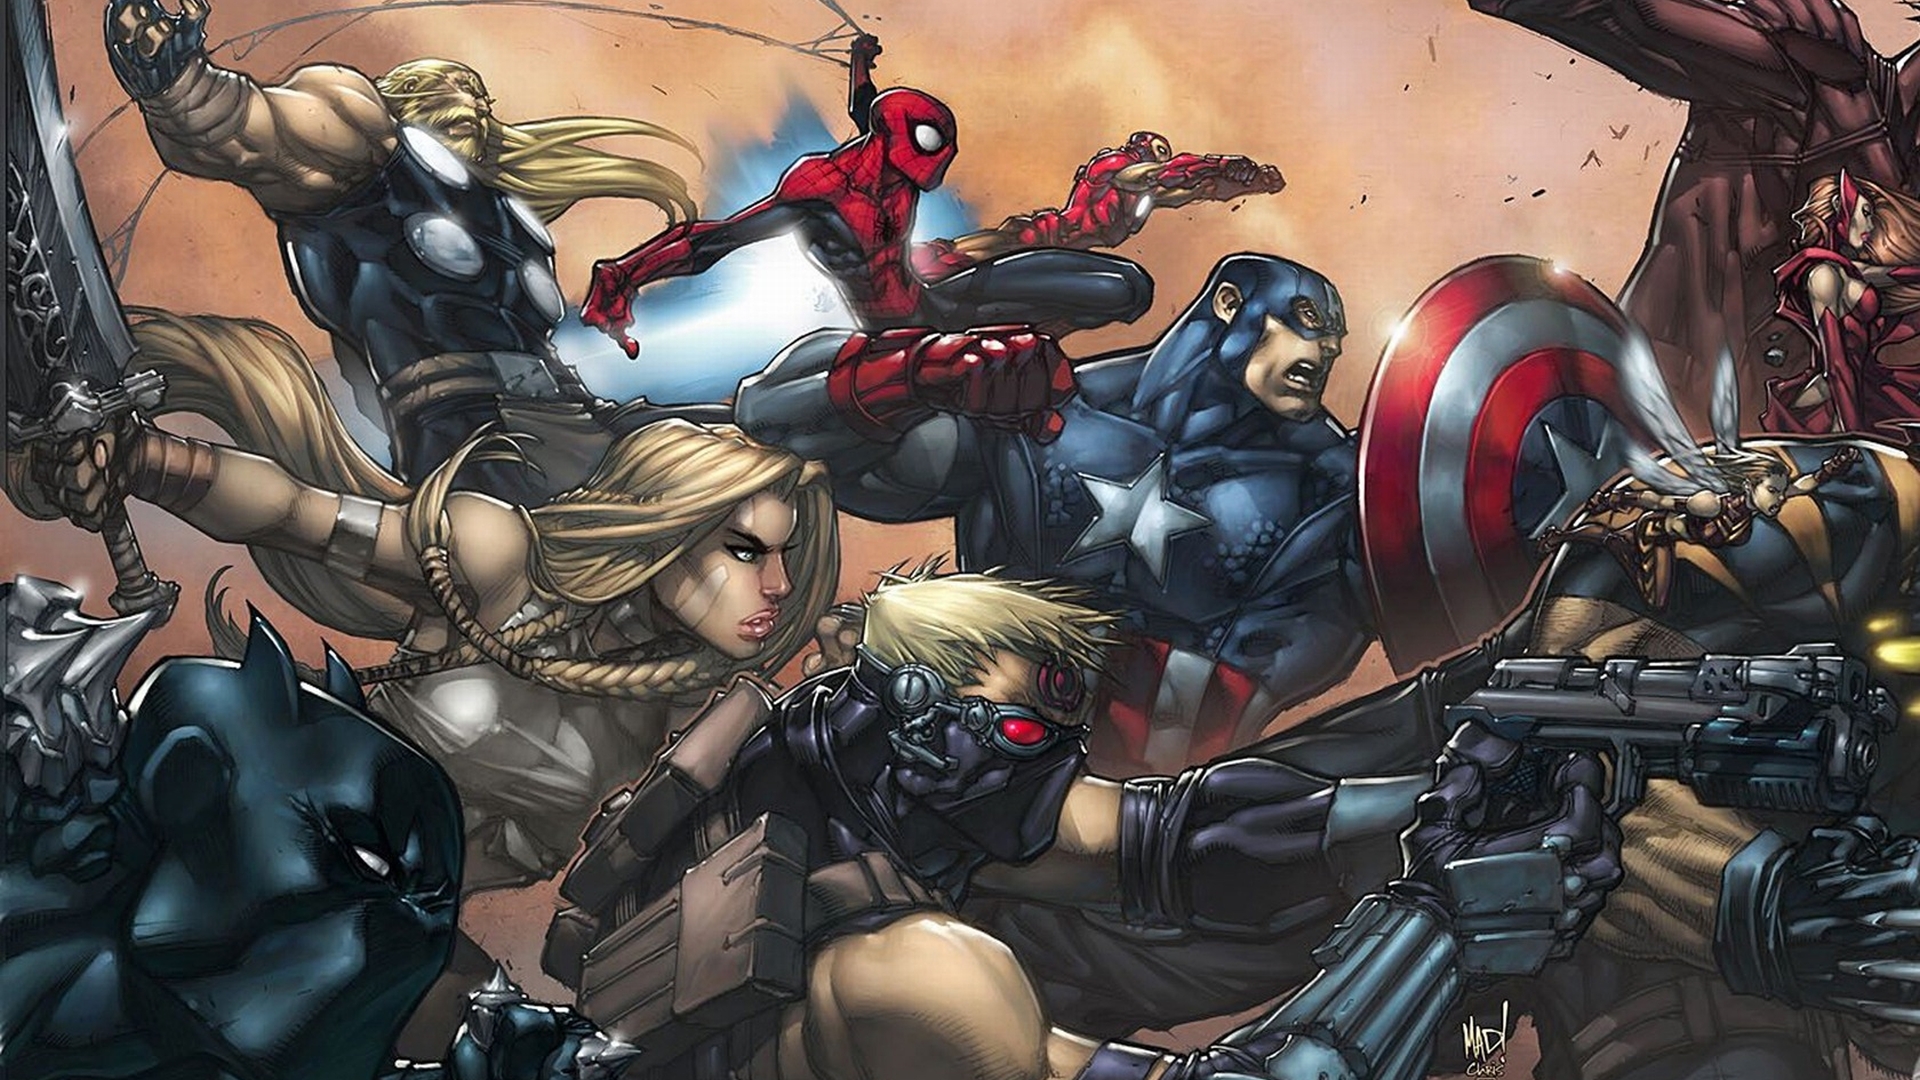 Ultimate superhero team assembled featuring Spider-Man, Captain America, Thor, Black Panther, Iron Man, and more.